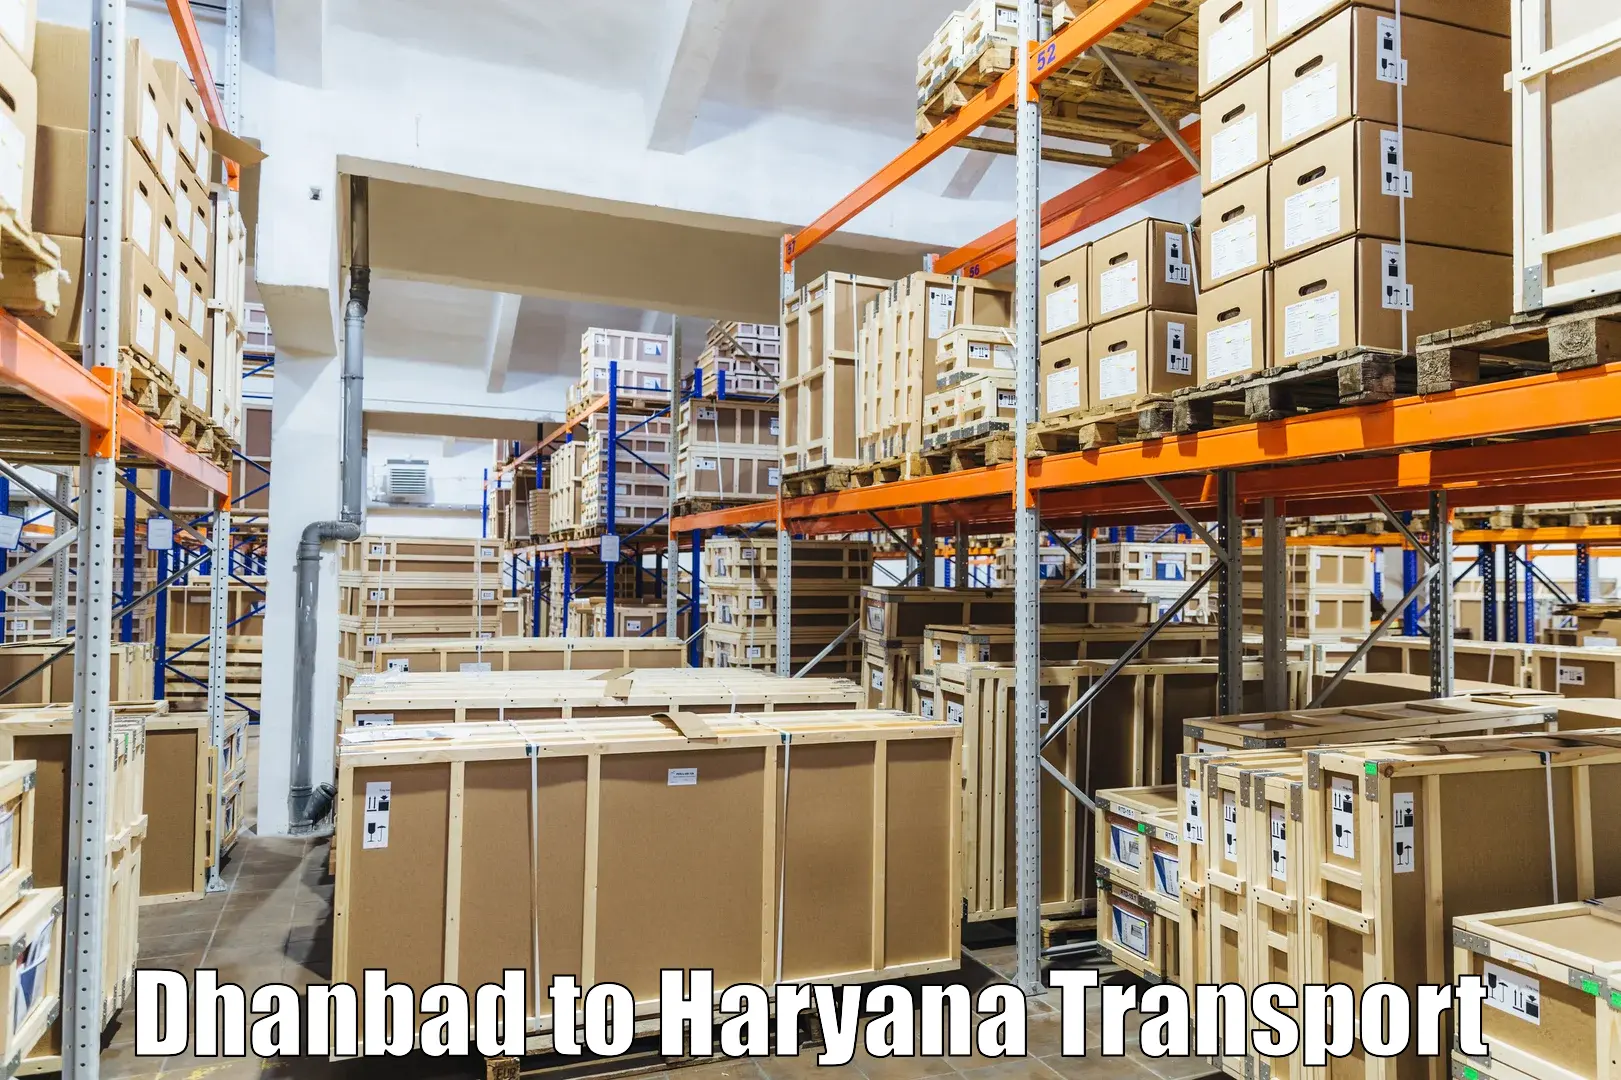 Truck transport companies in India Dhanbad to Chaudhary Charan Singh Haryana Agricultural University Hisar